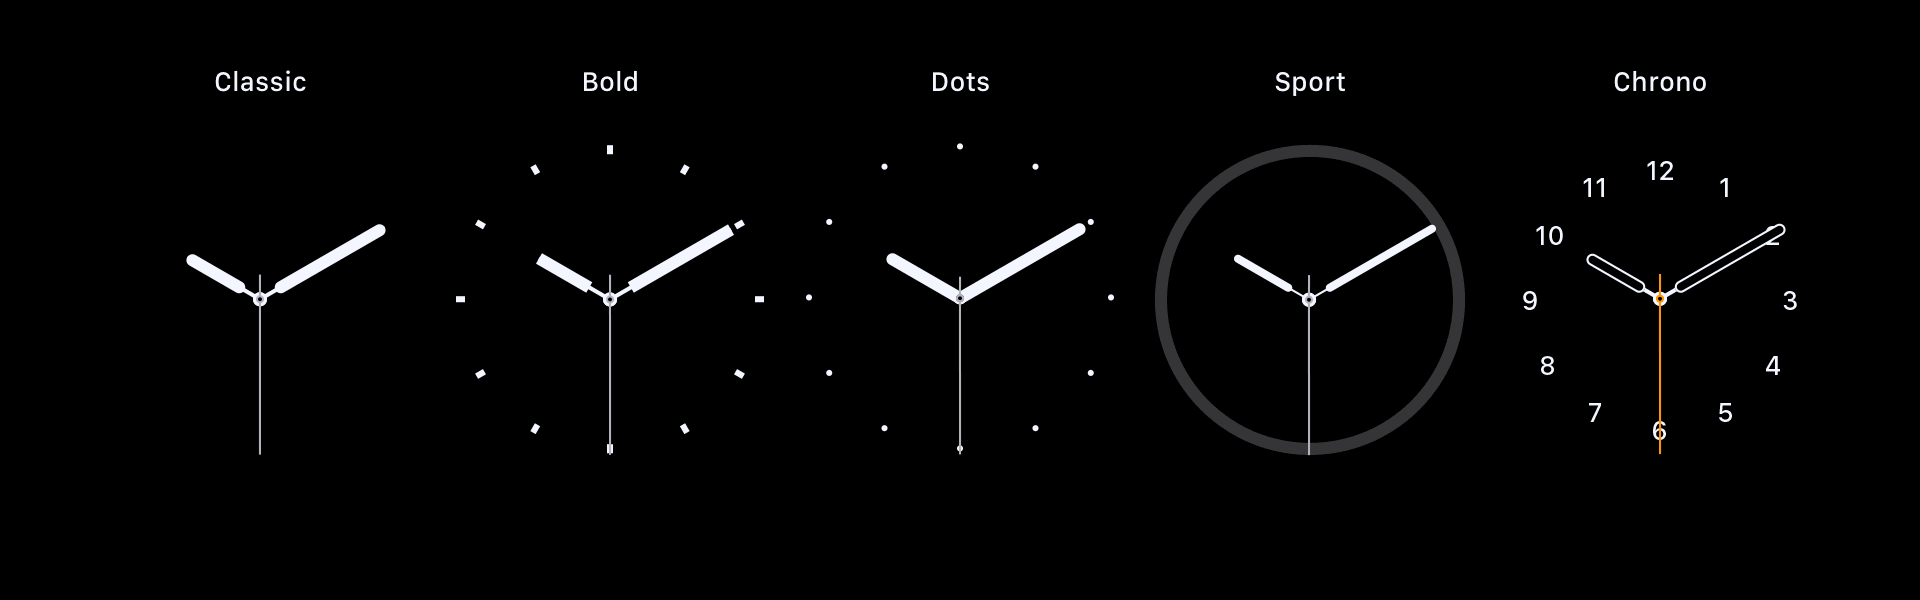 WatchOS analog complexity